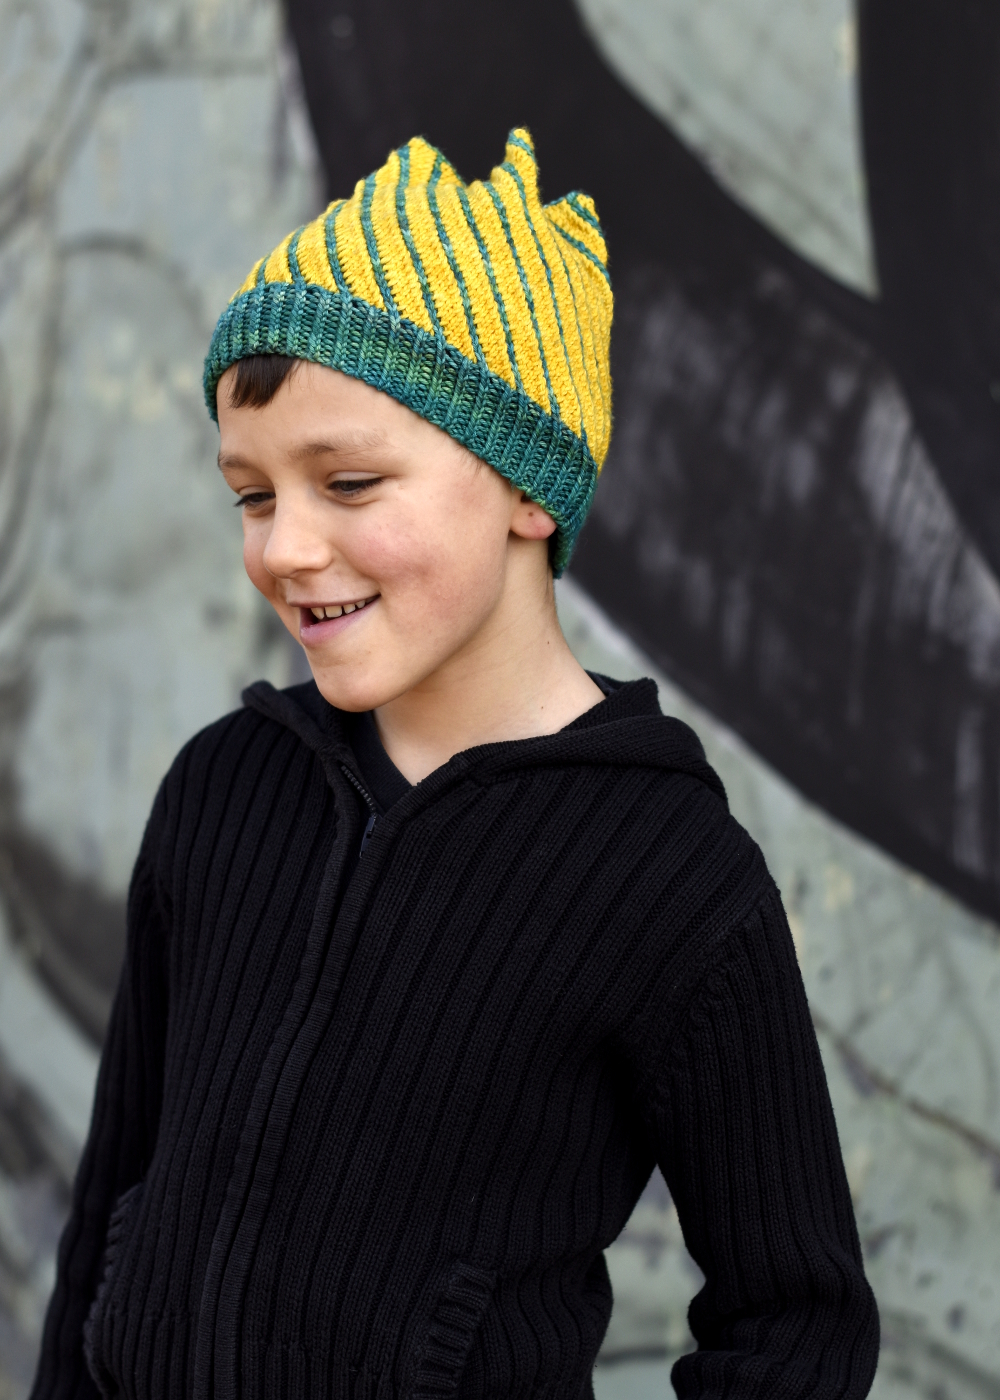 Torsione hand knitting pattern for structured spiral Hat